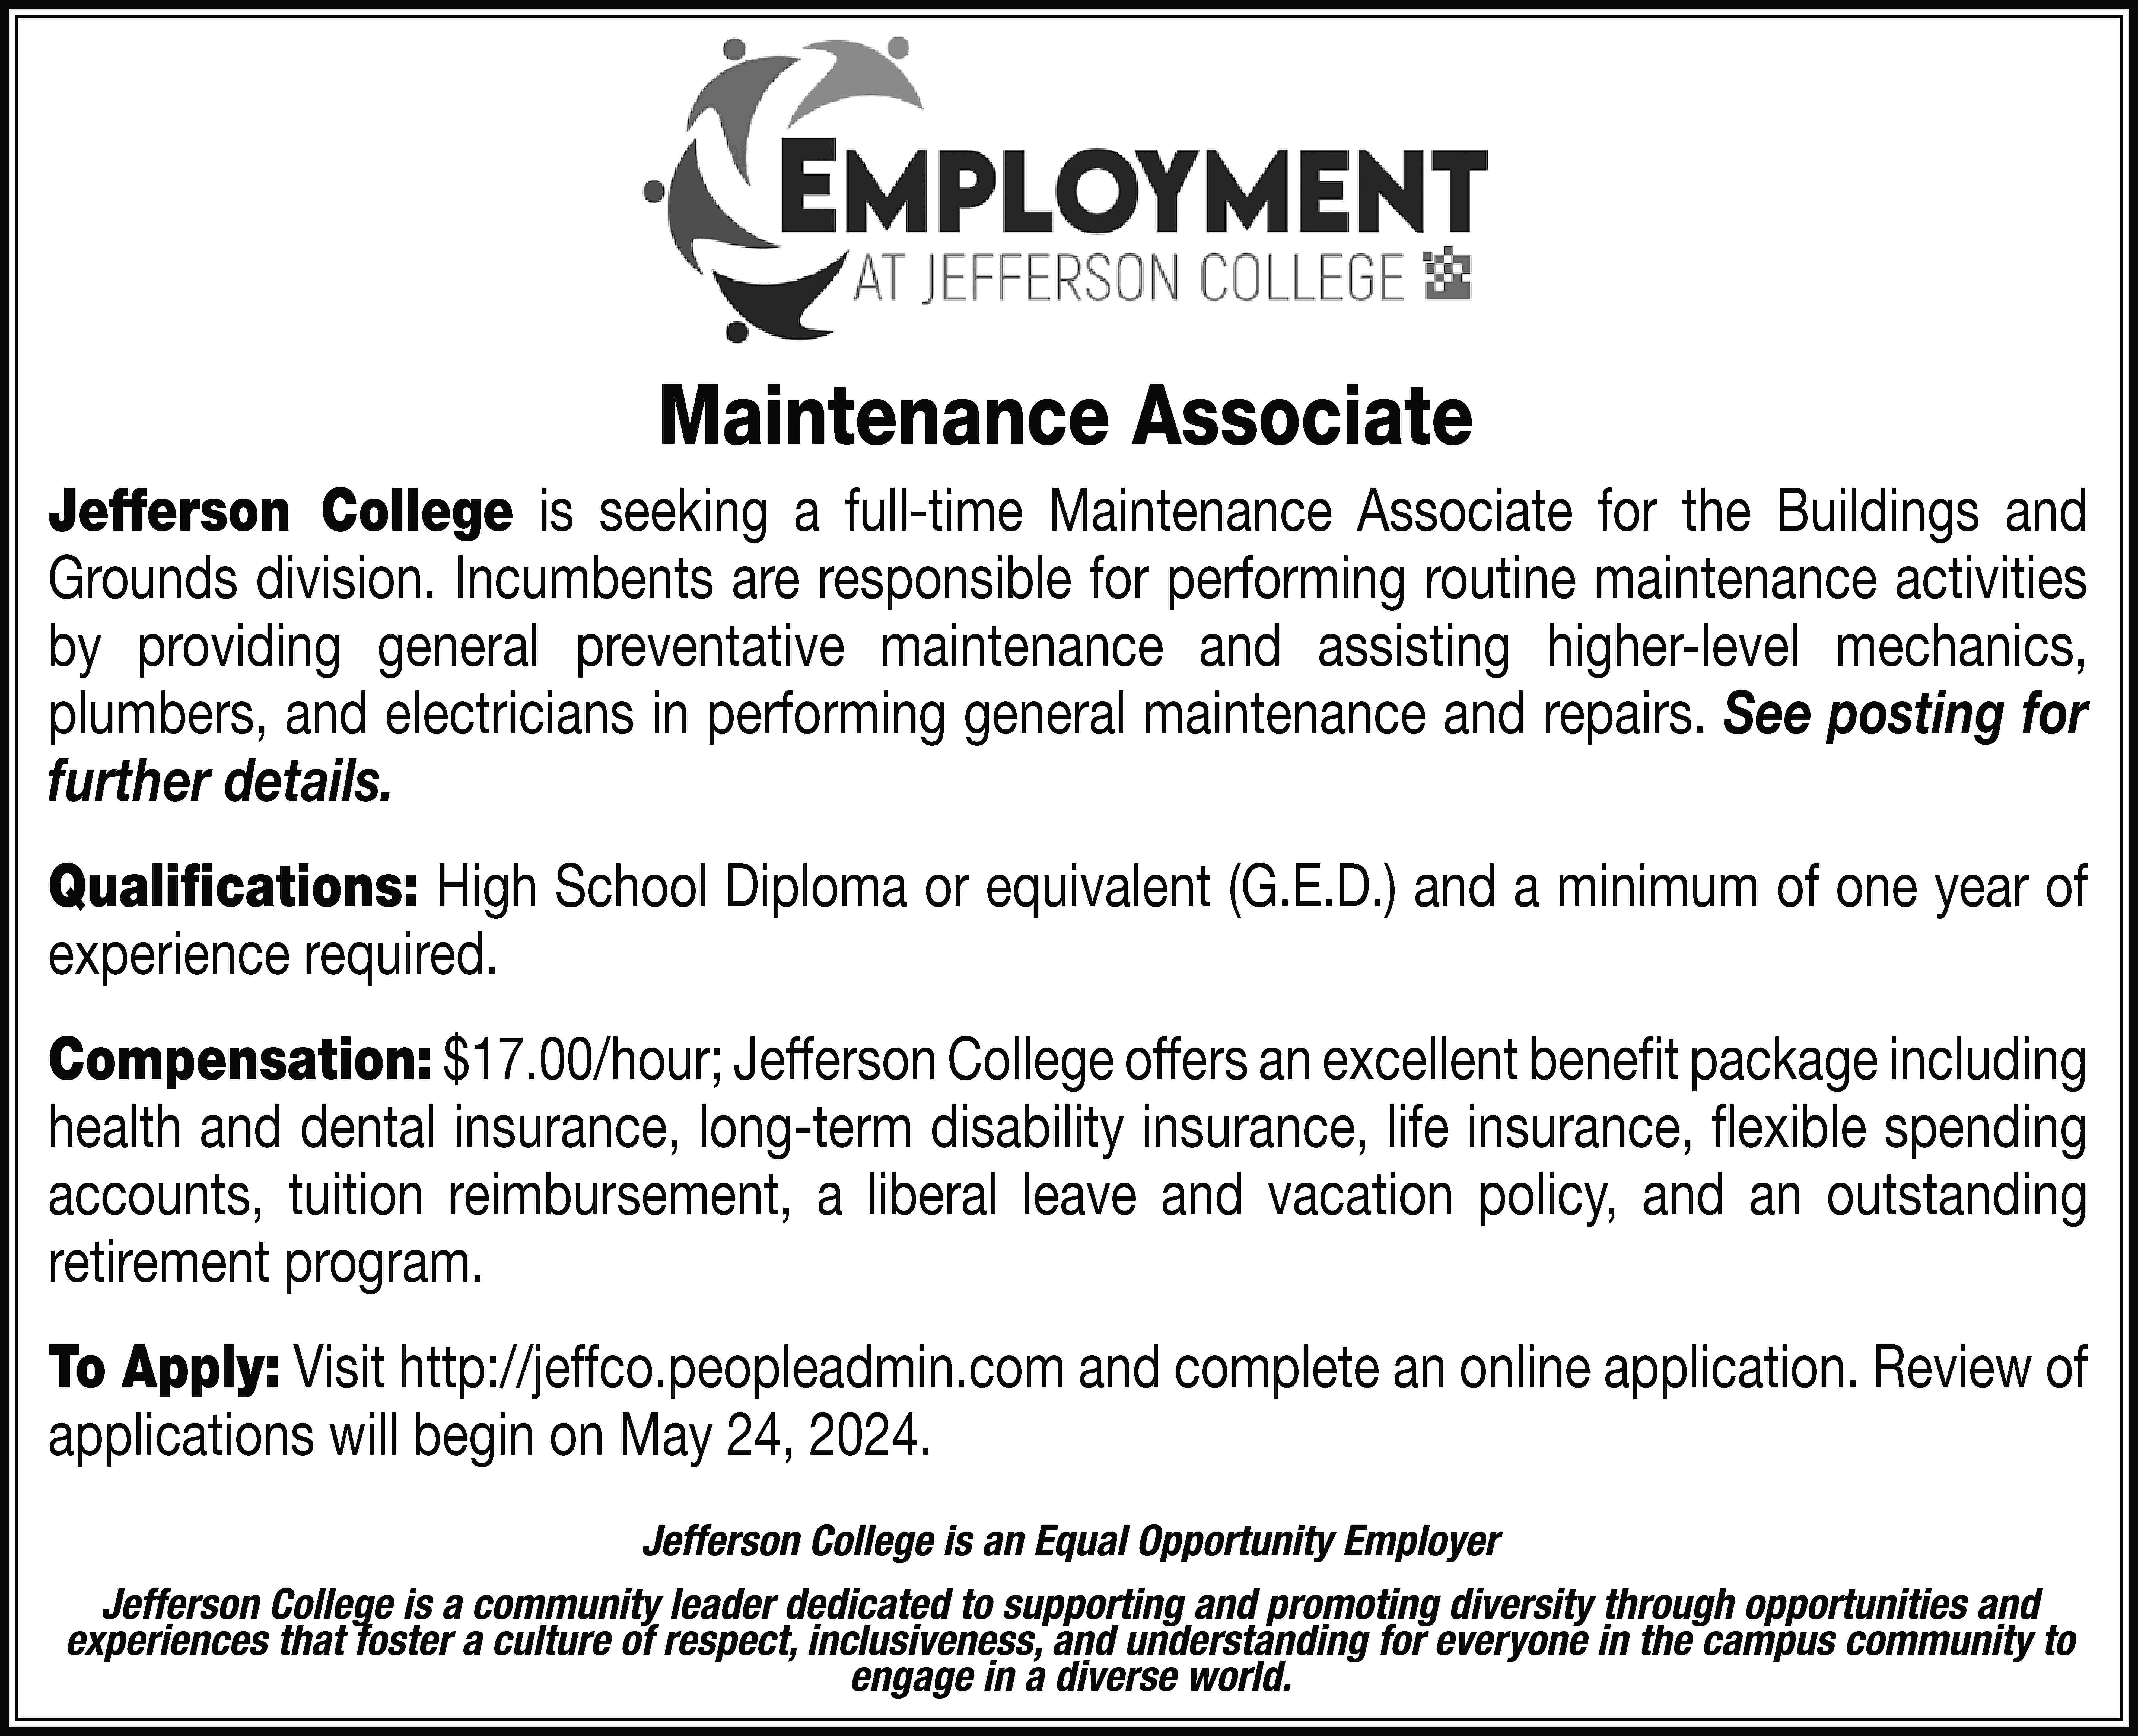 Maintenance Associate Jefferson College is  Maintenance Associate Jefferson College is seeking a full-time Maintenance Associate for the Buildings and Grounds division. Incumbents are responsible for performing routine maintenance activities by providing general preventative maintenance and assisting higher-level mechanics, plumbers, and electricians in performing general maintenance and repairs. See posting for further details. Qualifications: High School Diploma or equivalent (G.E.D.) and a minimum of one year of experience required. Compensation: $17.00/hour; Jefferson College offers an excellent benefit package including health and dental insurance, long-term disability insurance, life insurance, flexible spending accounts, tuition reimbursement, a liberal leave and vacation policy, and an outstanding retirement program. To Apply: Visit http://jeffco.peopleadmin.com and complete an online application. Review of applications will begin on May 24, 2024. Jefferson College is an Equal Opportunity Employer Jefferson College is a community leader dedicated to supporting and promoting diversity through opportunities and experiences that foster a culture of respect, inclusiveness, and understanding for everyone in the campus community to engage in a diverse world.